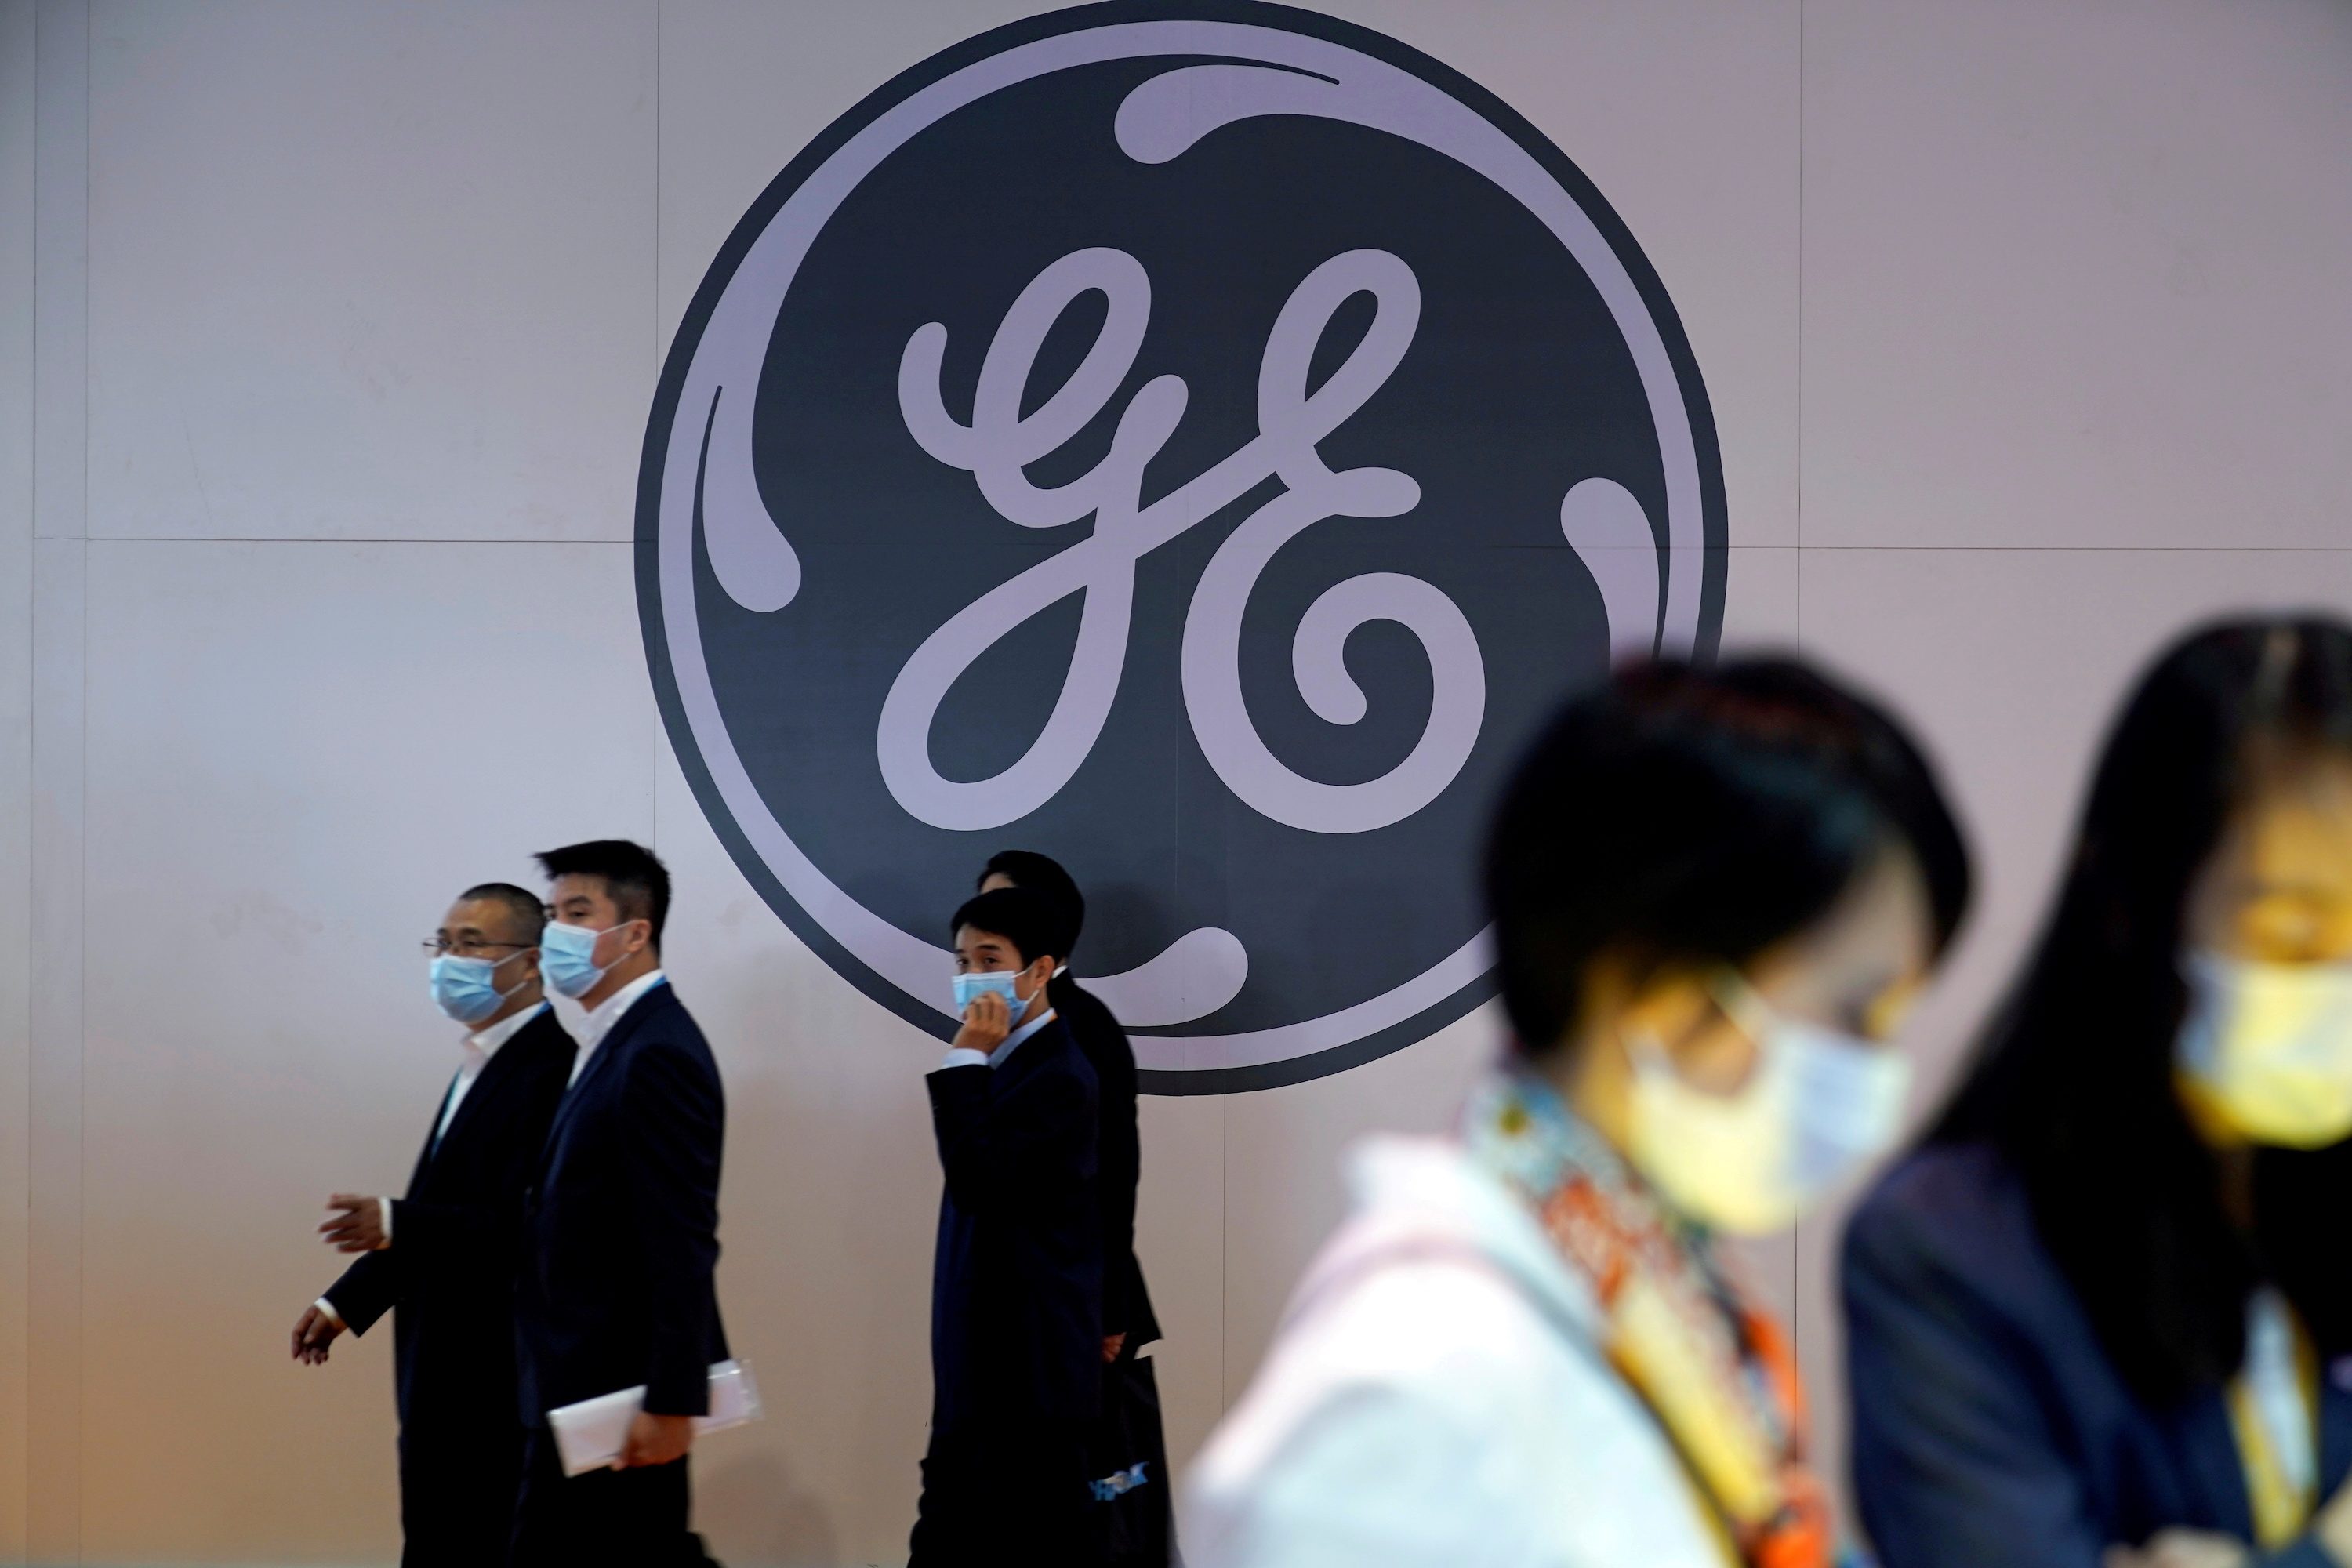 From Edison to Welch to Culp: The rise and fall of GE